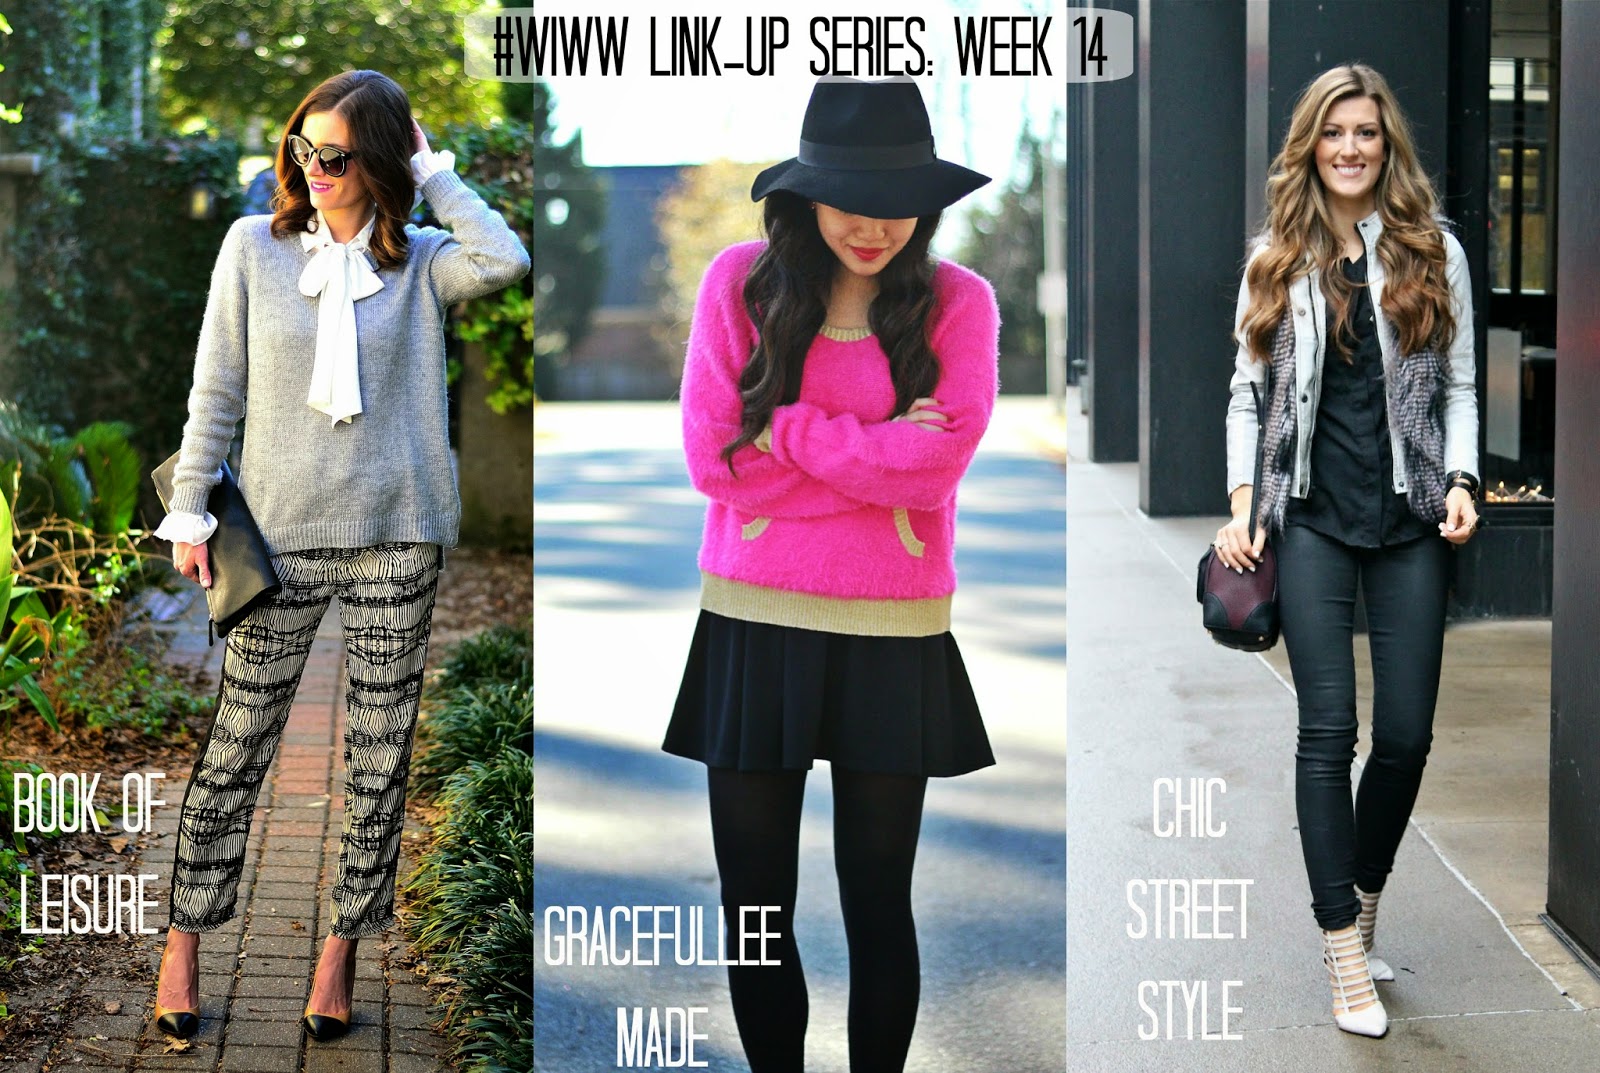 Book of Leisure: Gray skies, gray sweater, + WIWW Link-Up